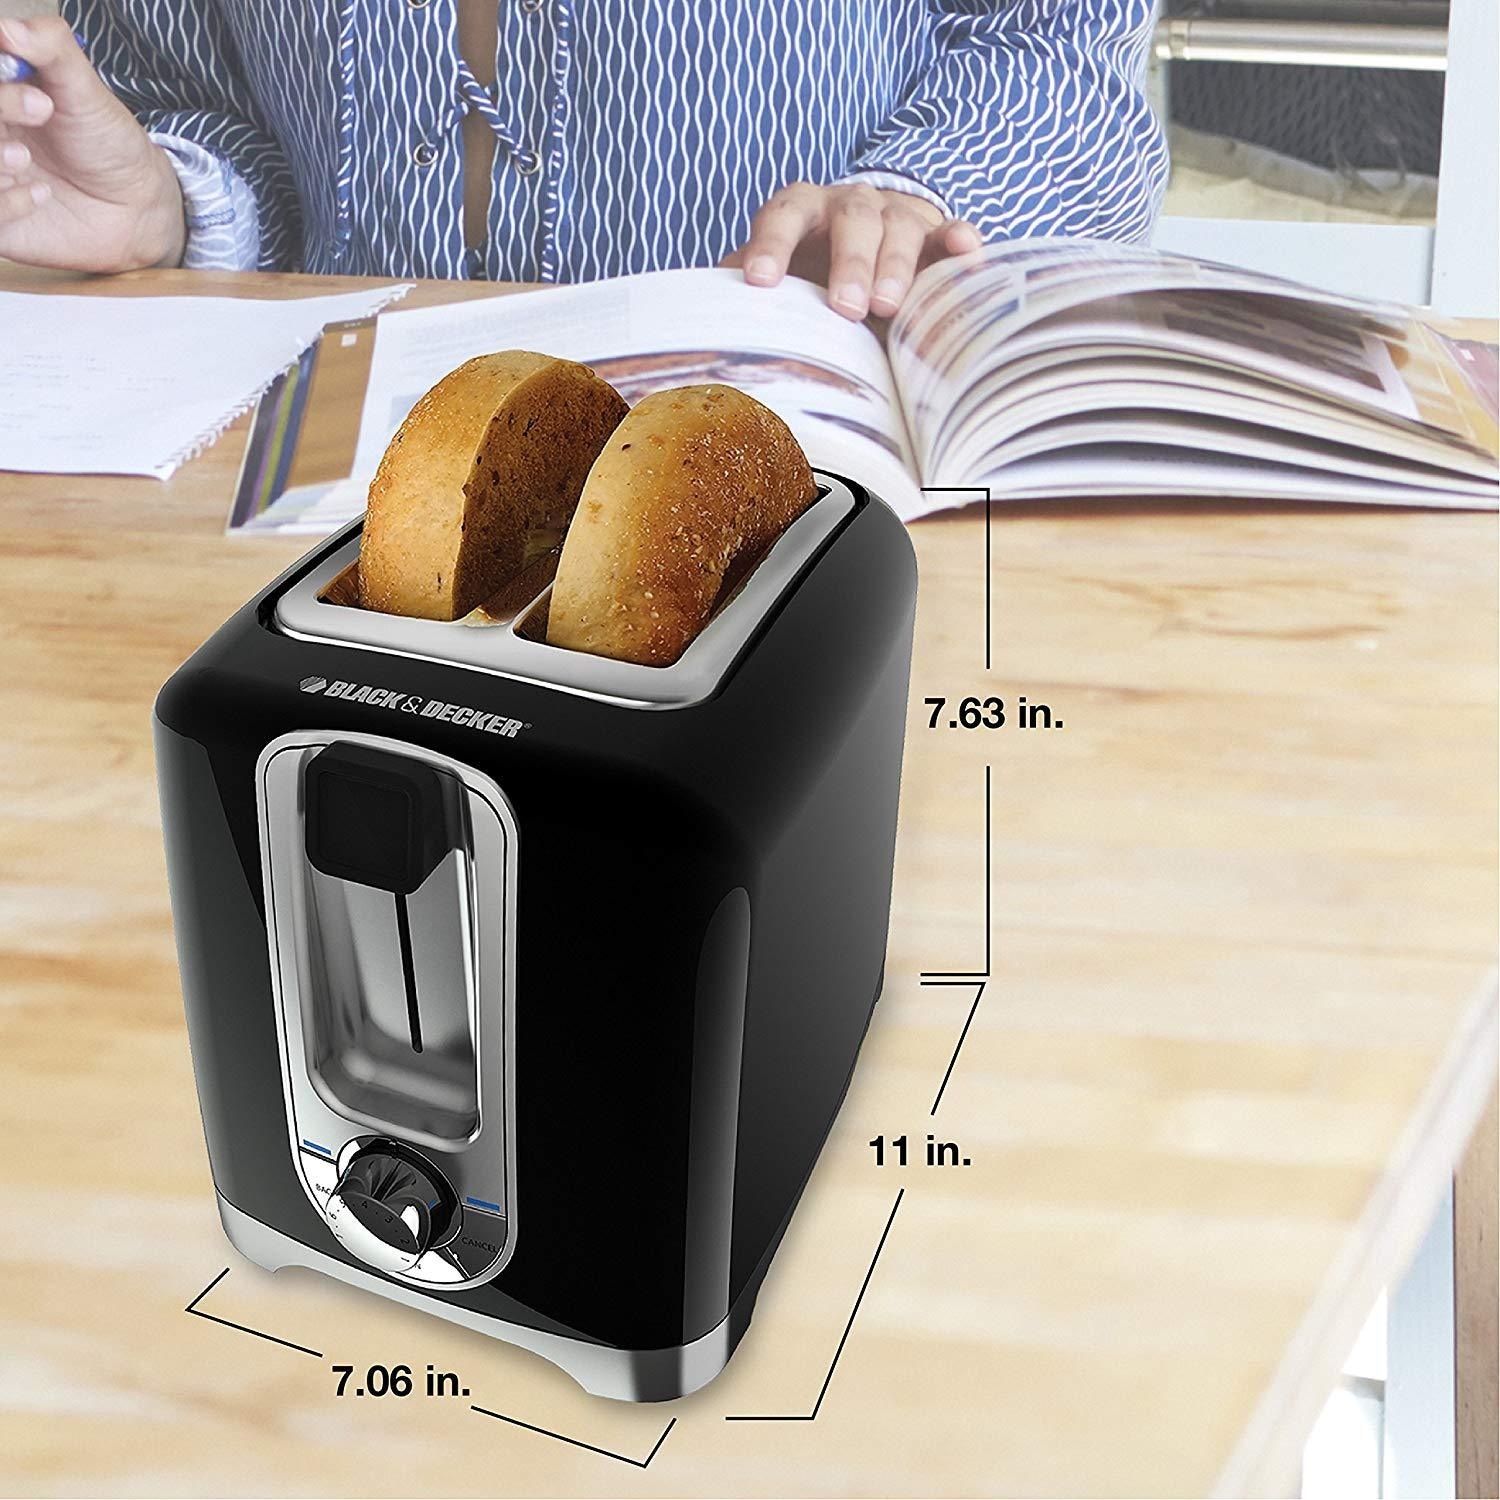 https://ak1.ostkcdn.com/images/products/is/images/direct/9ab22d1ba6172436f2fd489387ac0844ccd56995/BLACK-%26-DECKER-2-Slice-Toaster%2C-Square%2C-Black%2C-with-Bagel-Function-and-Removable-Crumb-Tray%2C-TR1256B.jpg